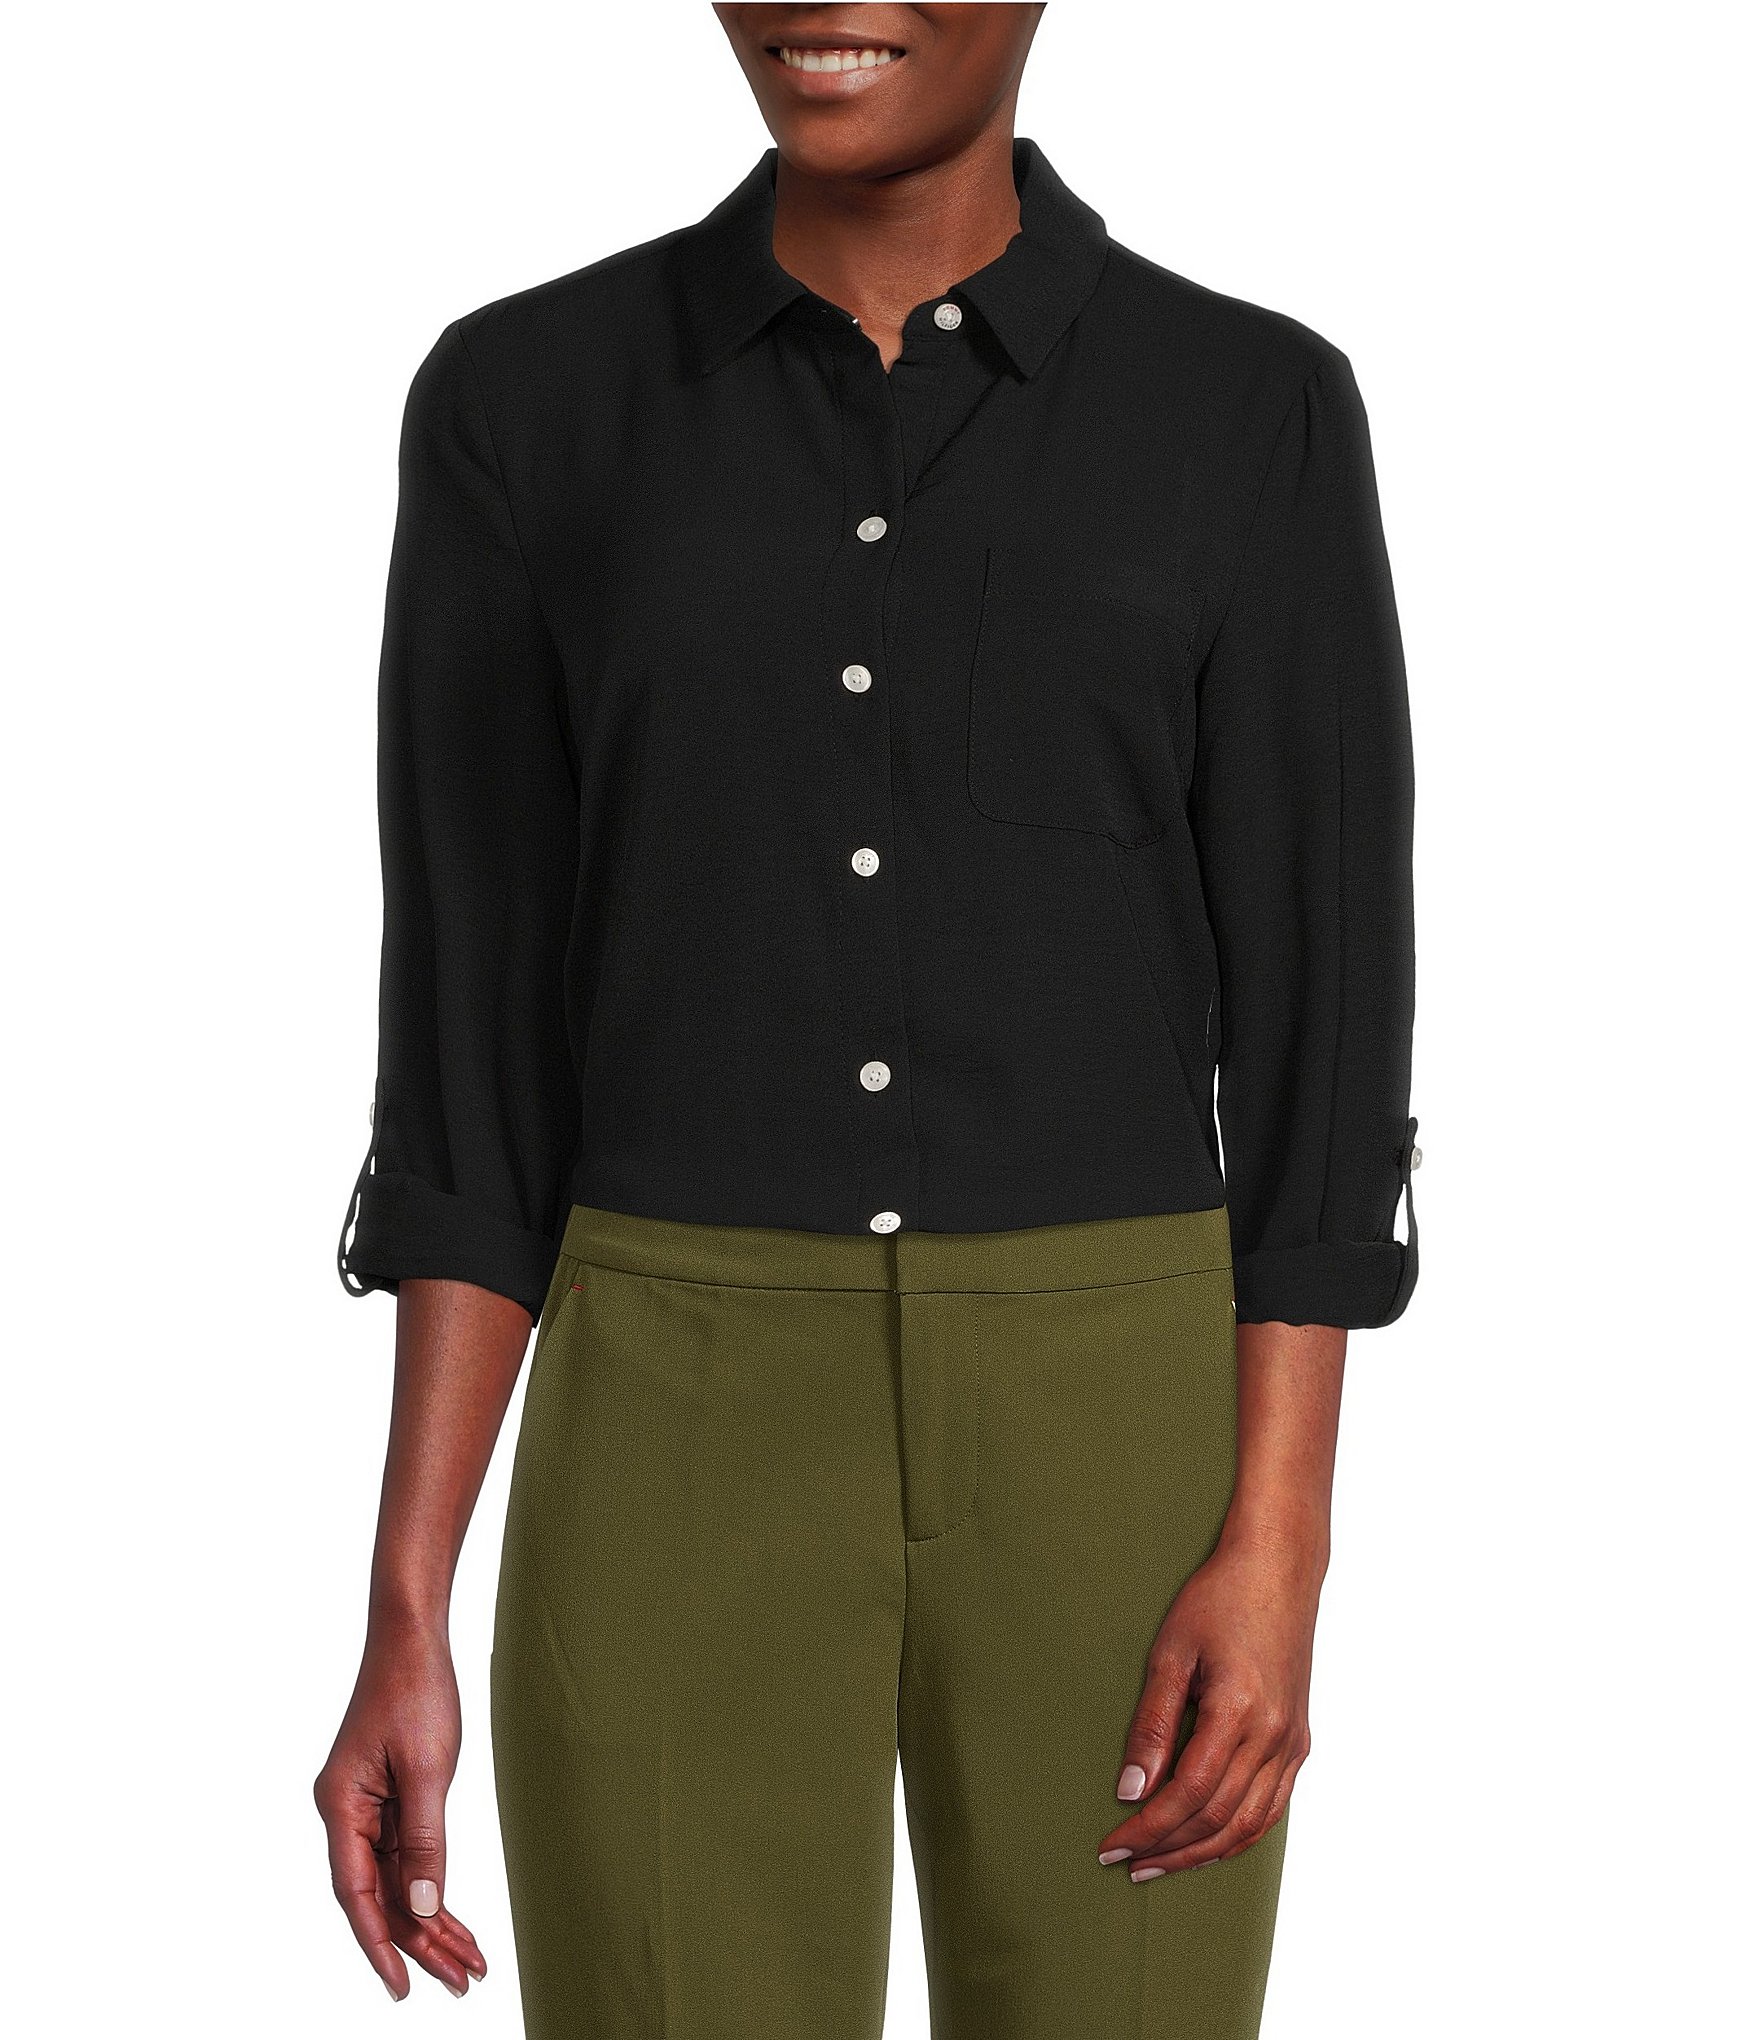 Buy Women's Shirts Tommy Hilfiger Long Sleeve Tops Online